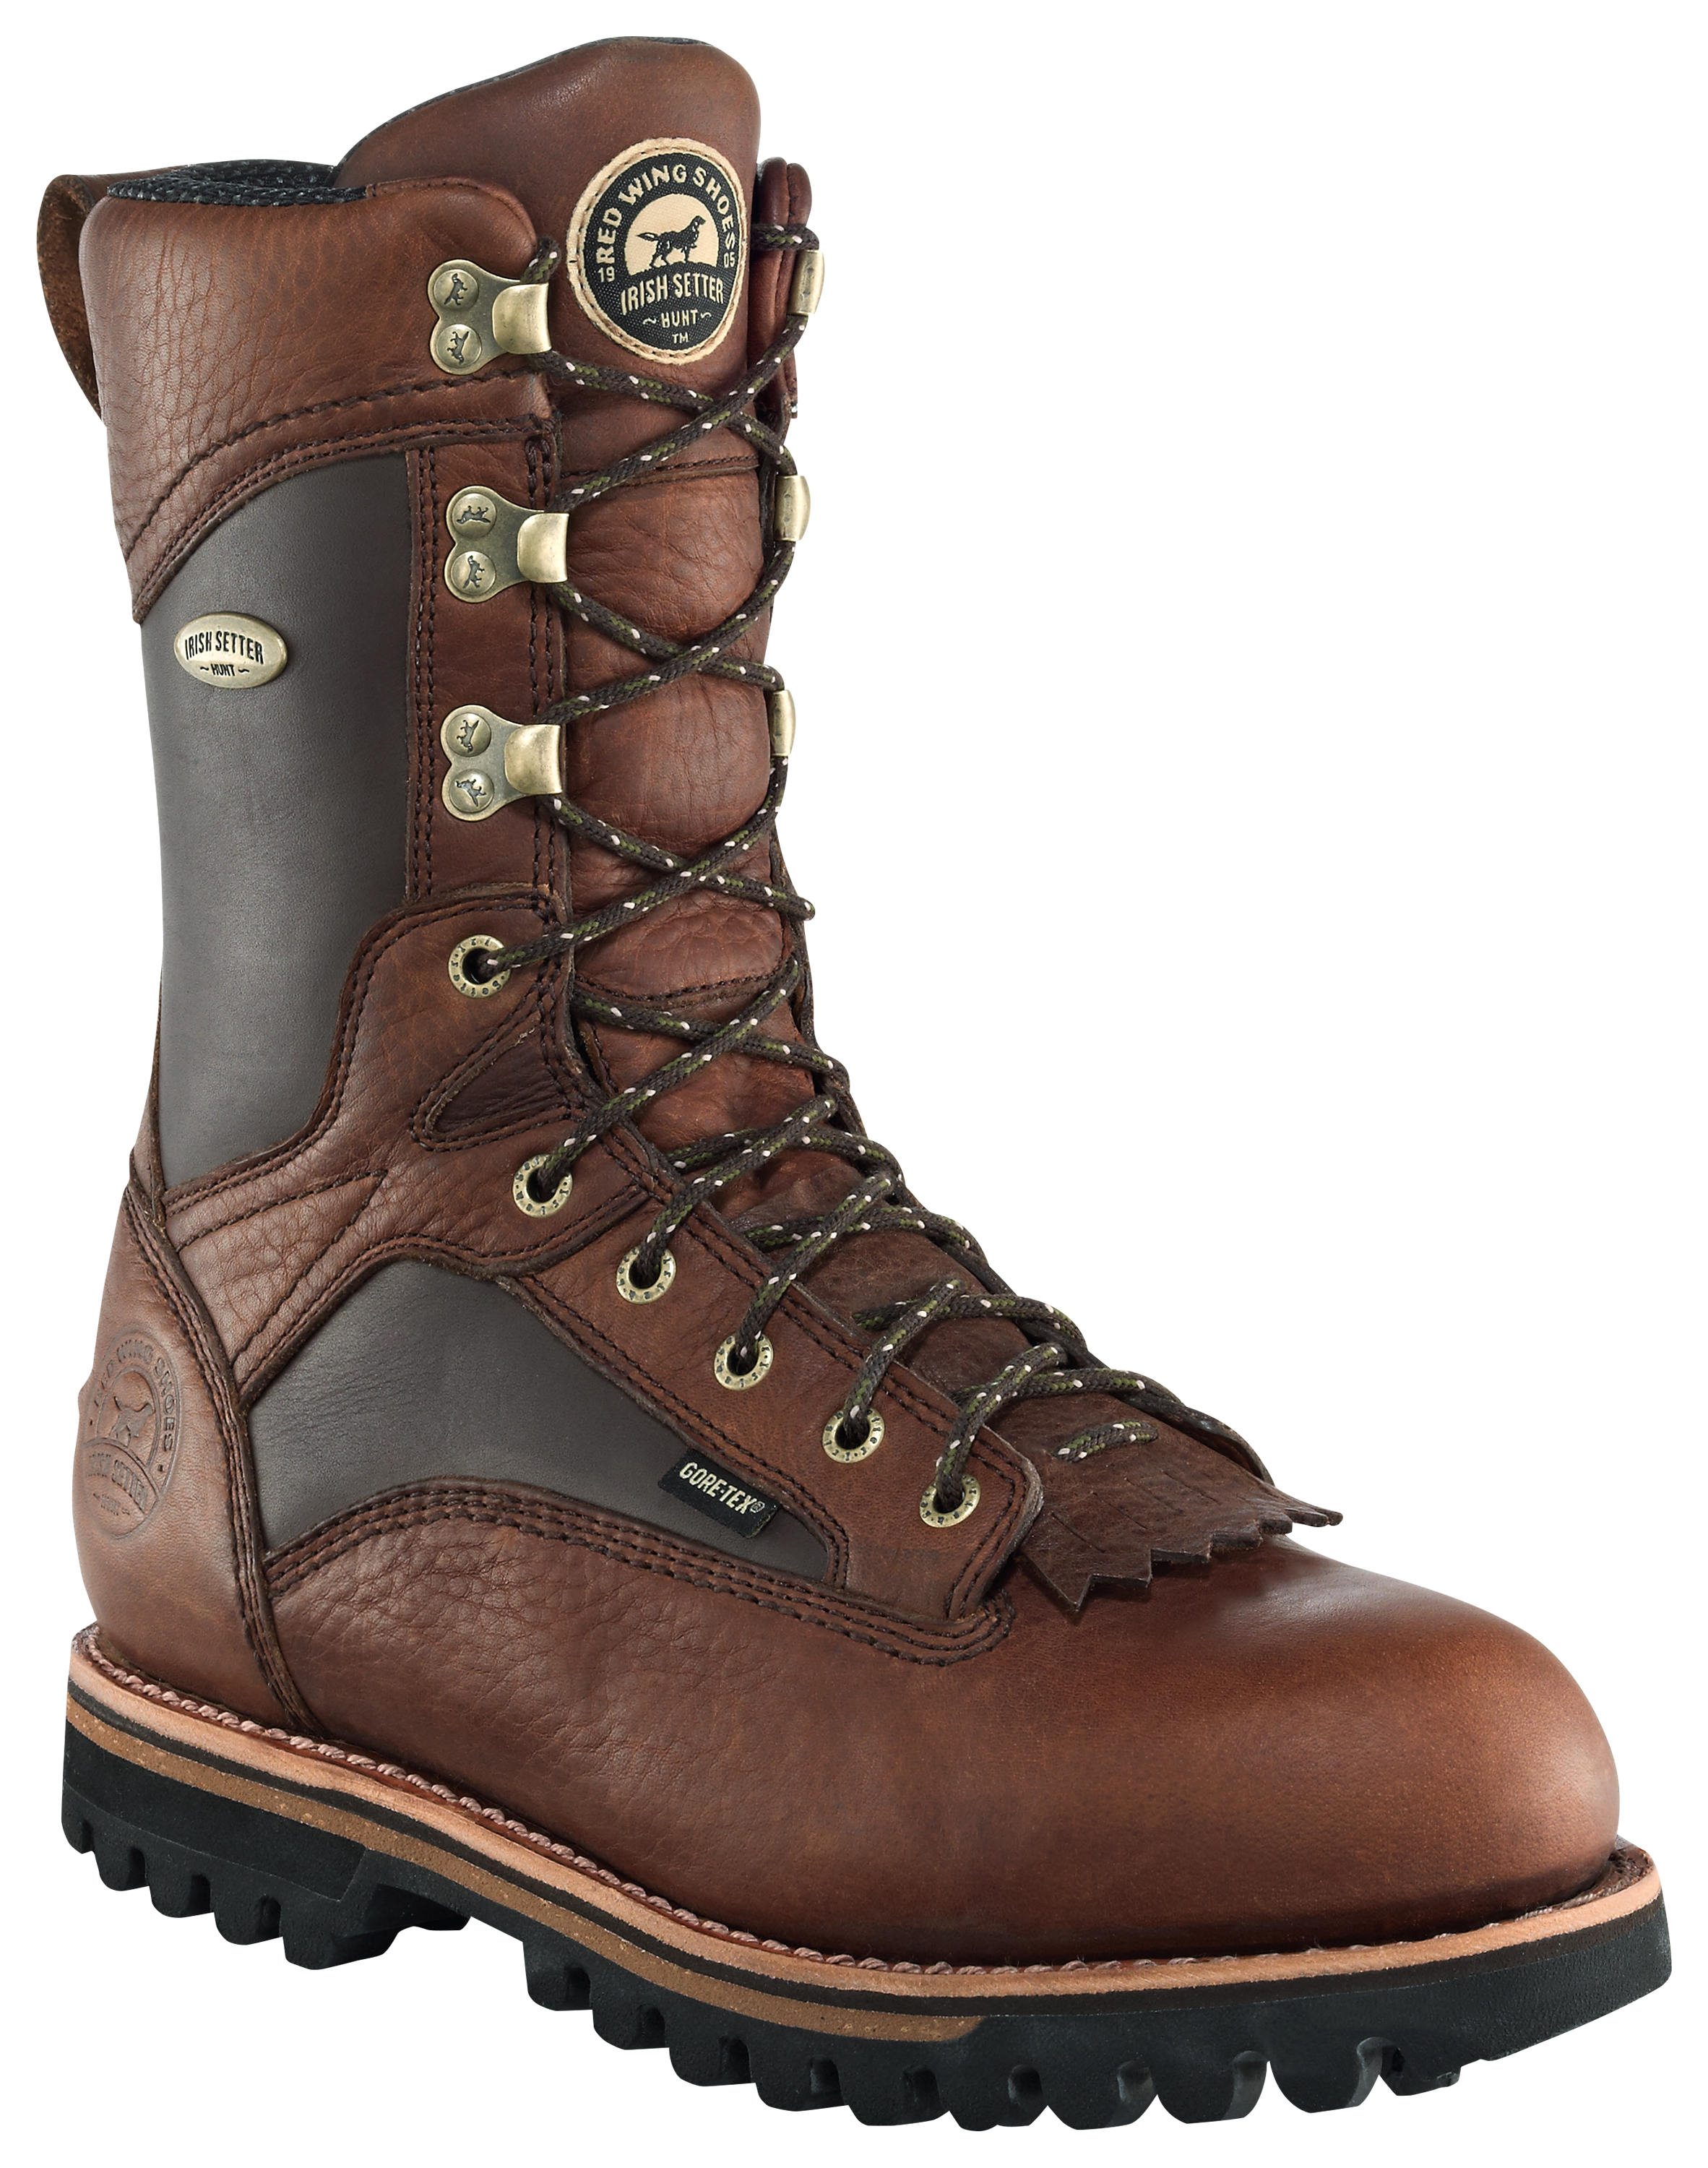 Irish Setter Elk Tracker 12'' 600 Gram Thinsulate Insulated Waterproof Hunting Boots for Men - Brown - 7 Extra Wide H